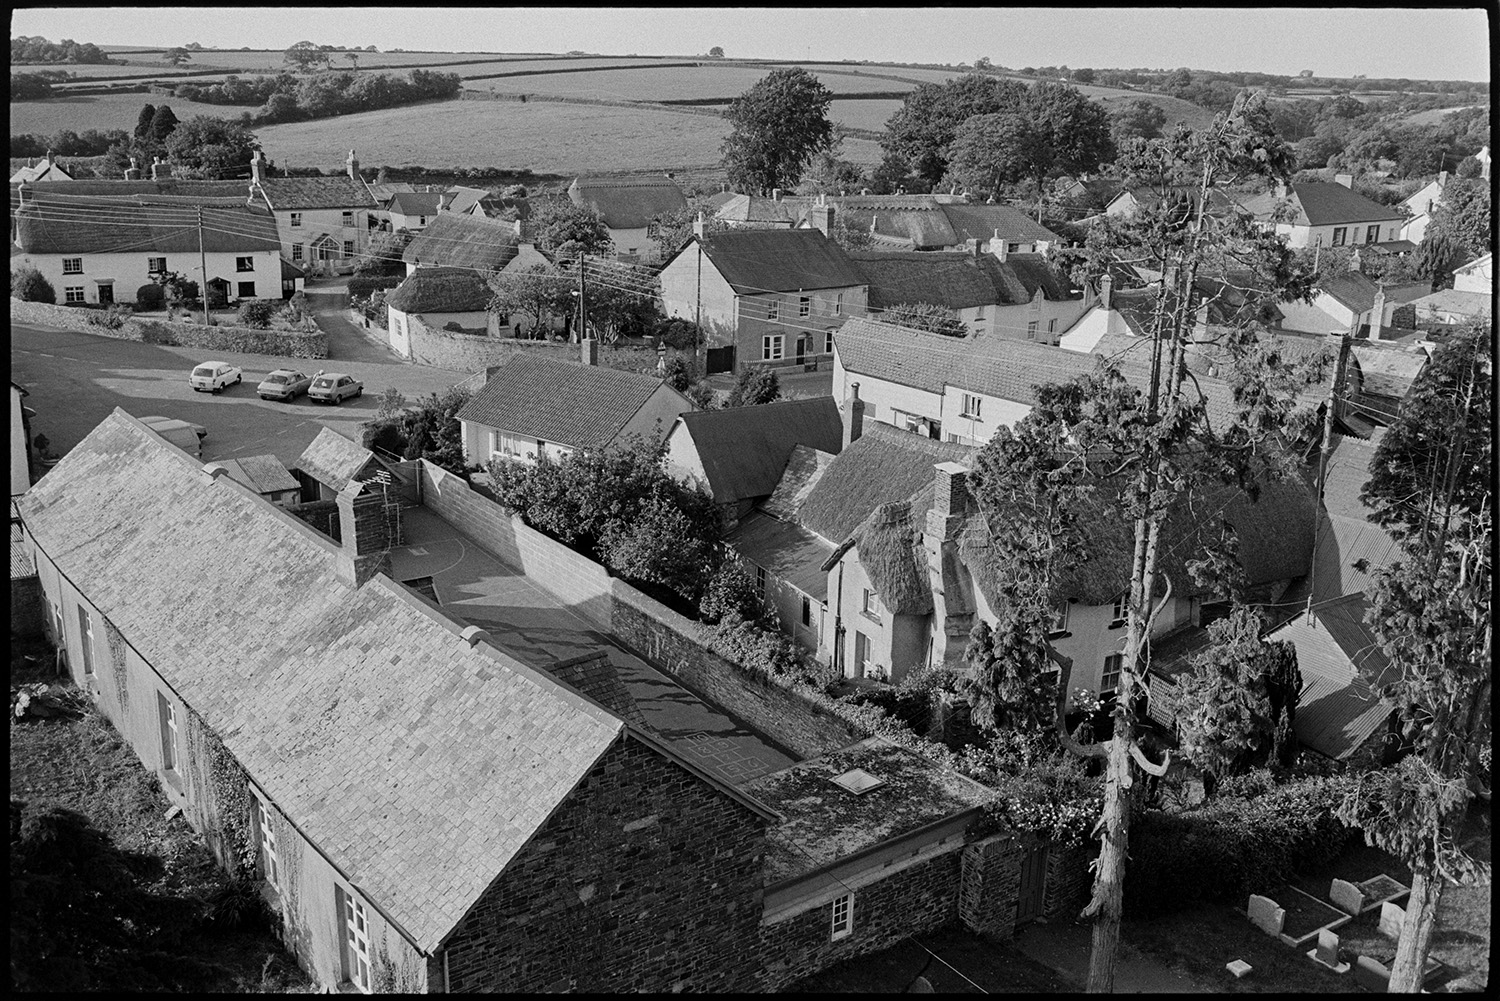 View of village and school from church tower. 
[A view of the village of Dolton taken from Dolton Church tower. Houses and thatched cottages are visible and Dolton Primary School and playground can be seen in the foreground.]